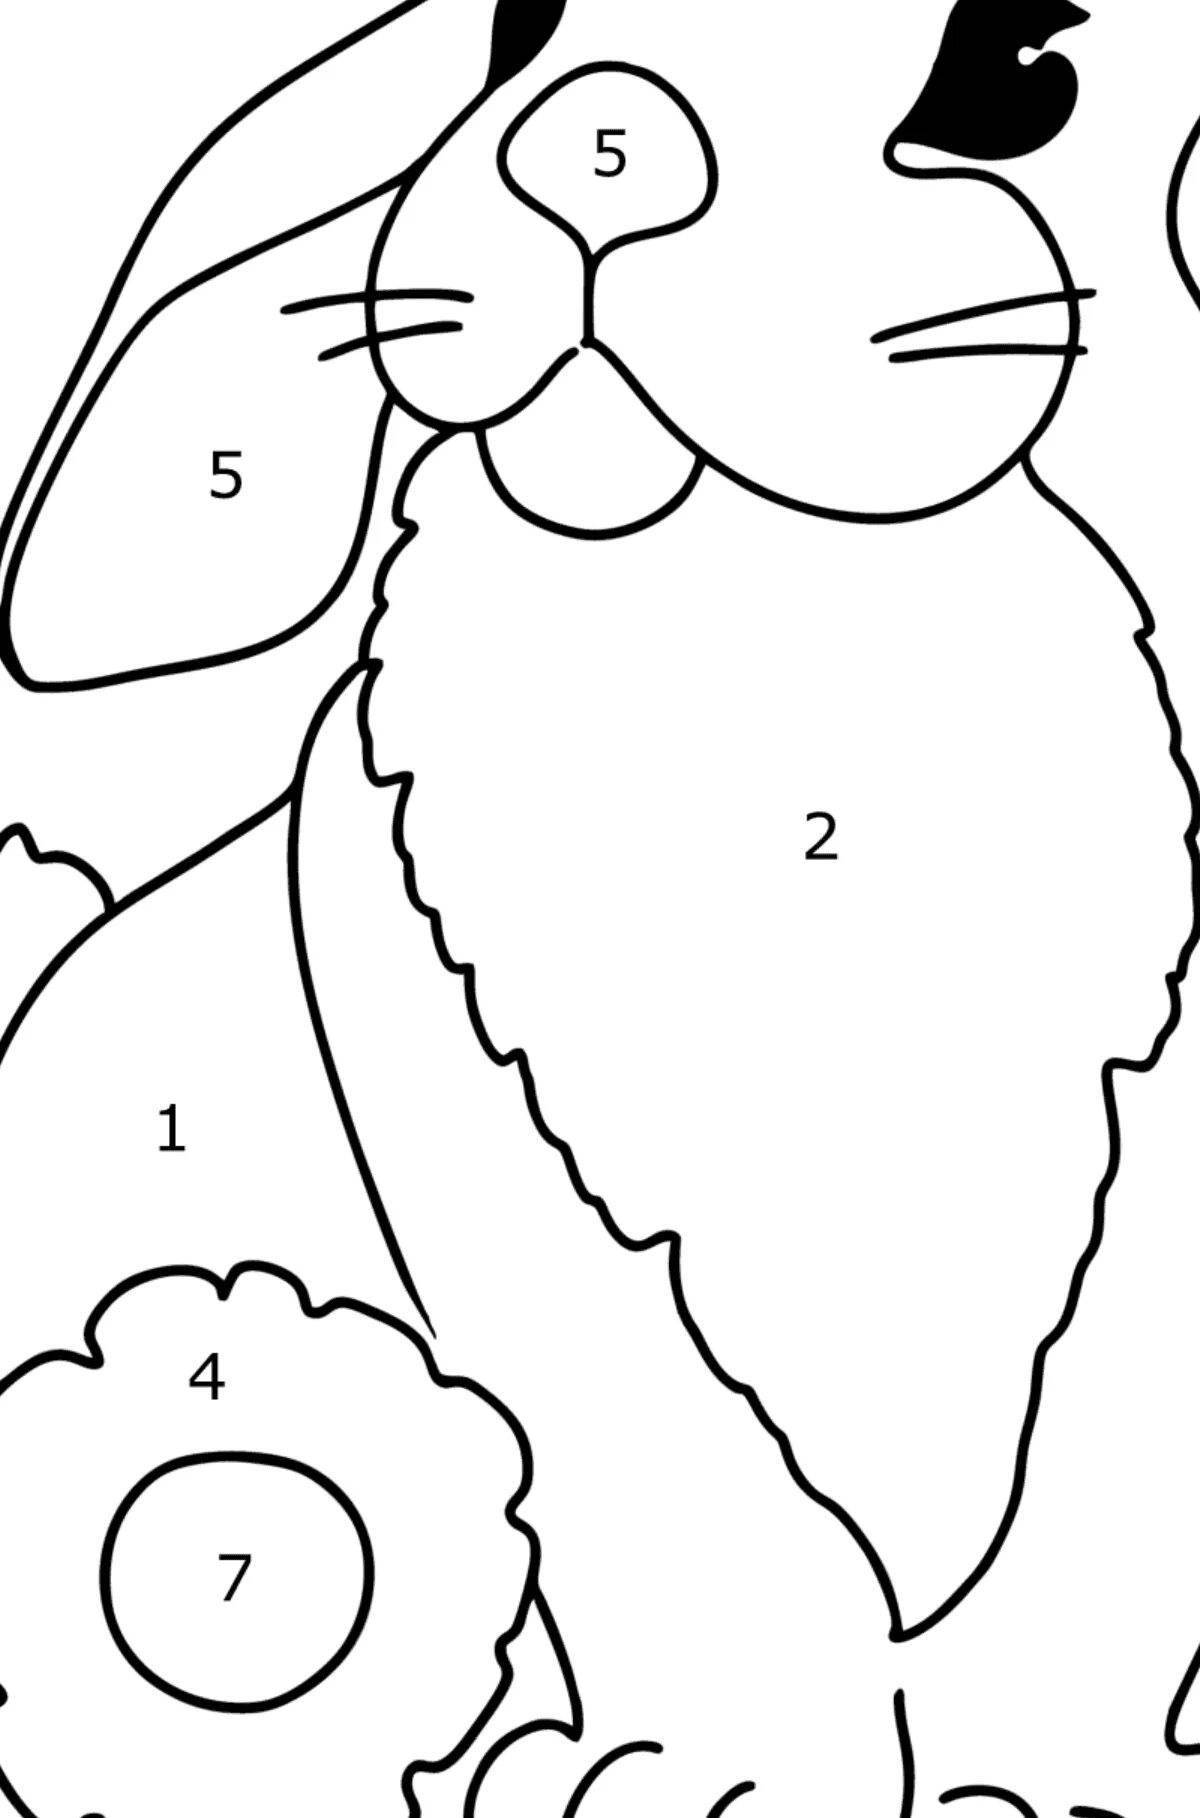 Colored rabbit by numbers coloring book